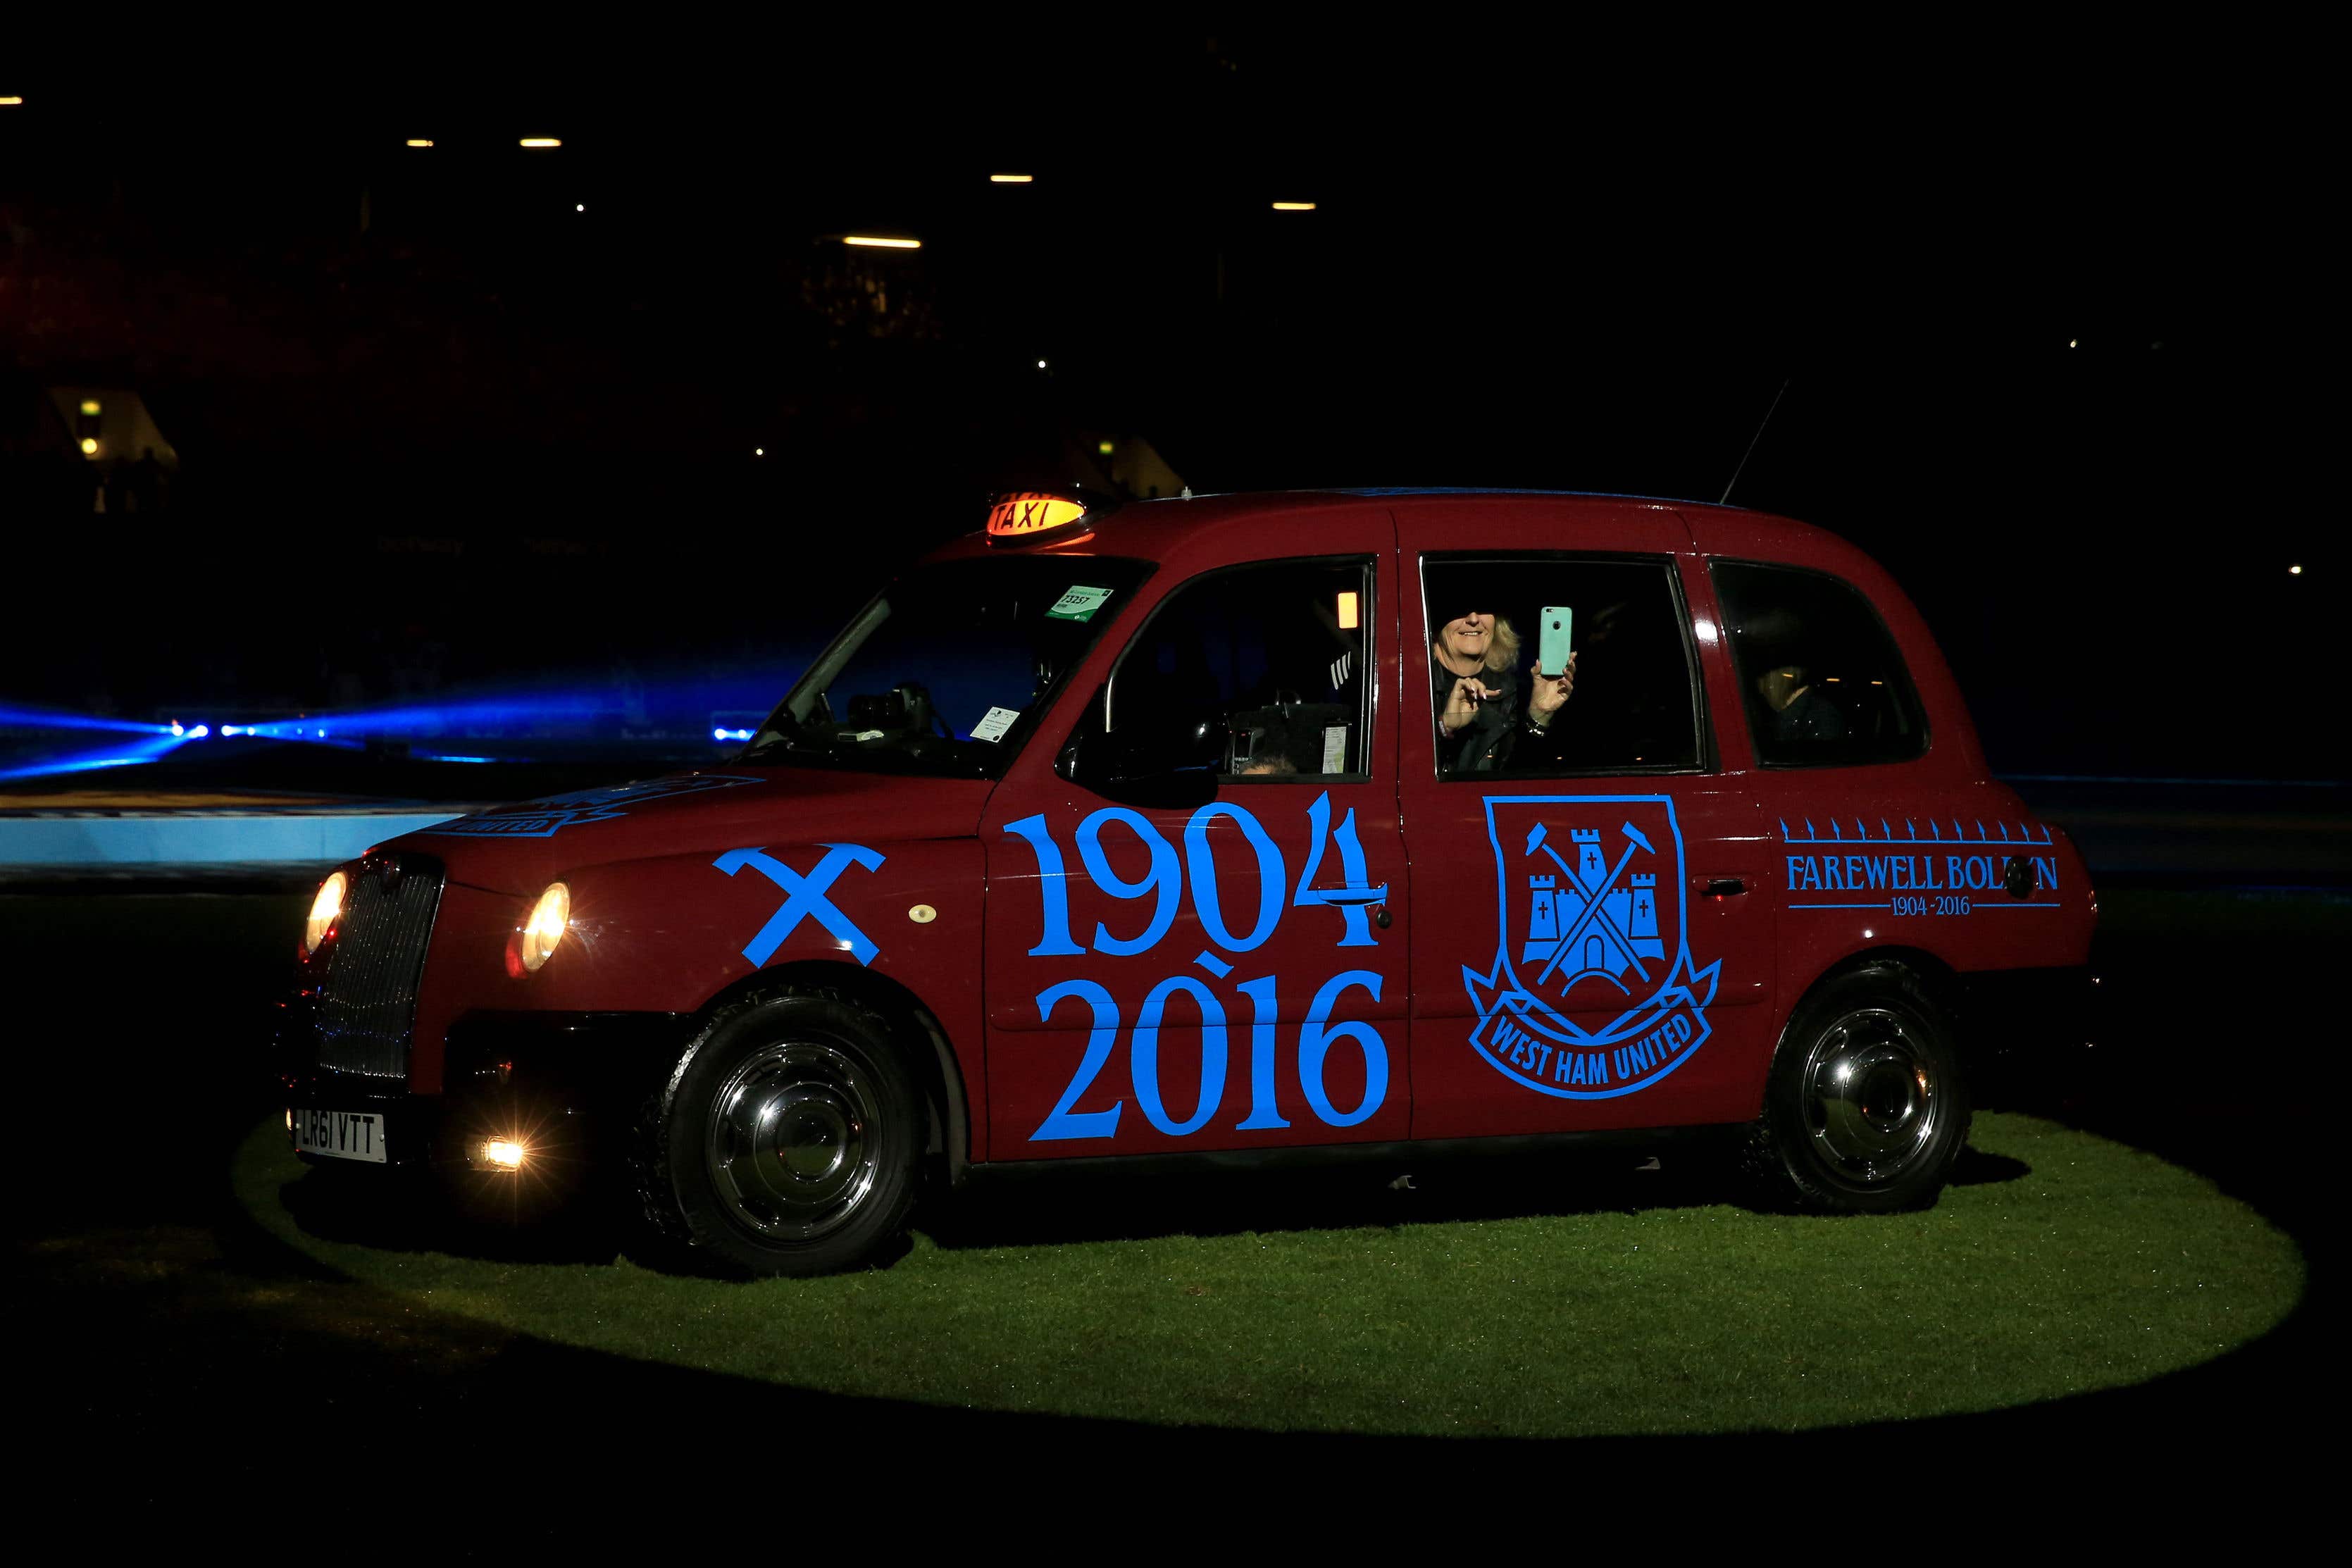 Former players arrive in taxis ahead of the final game to be played at Upton Park (Nick Potts/PA)